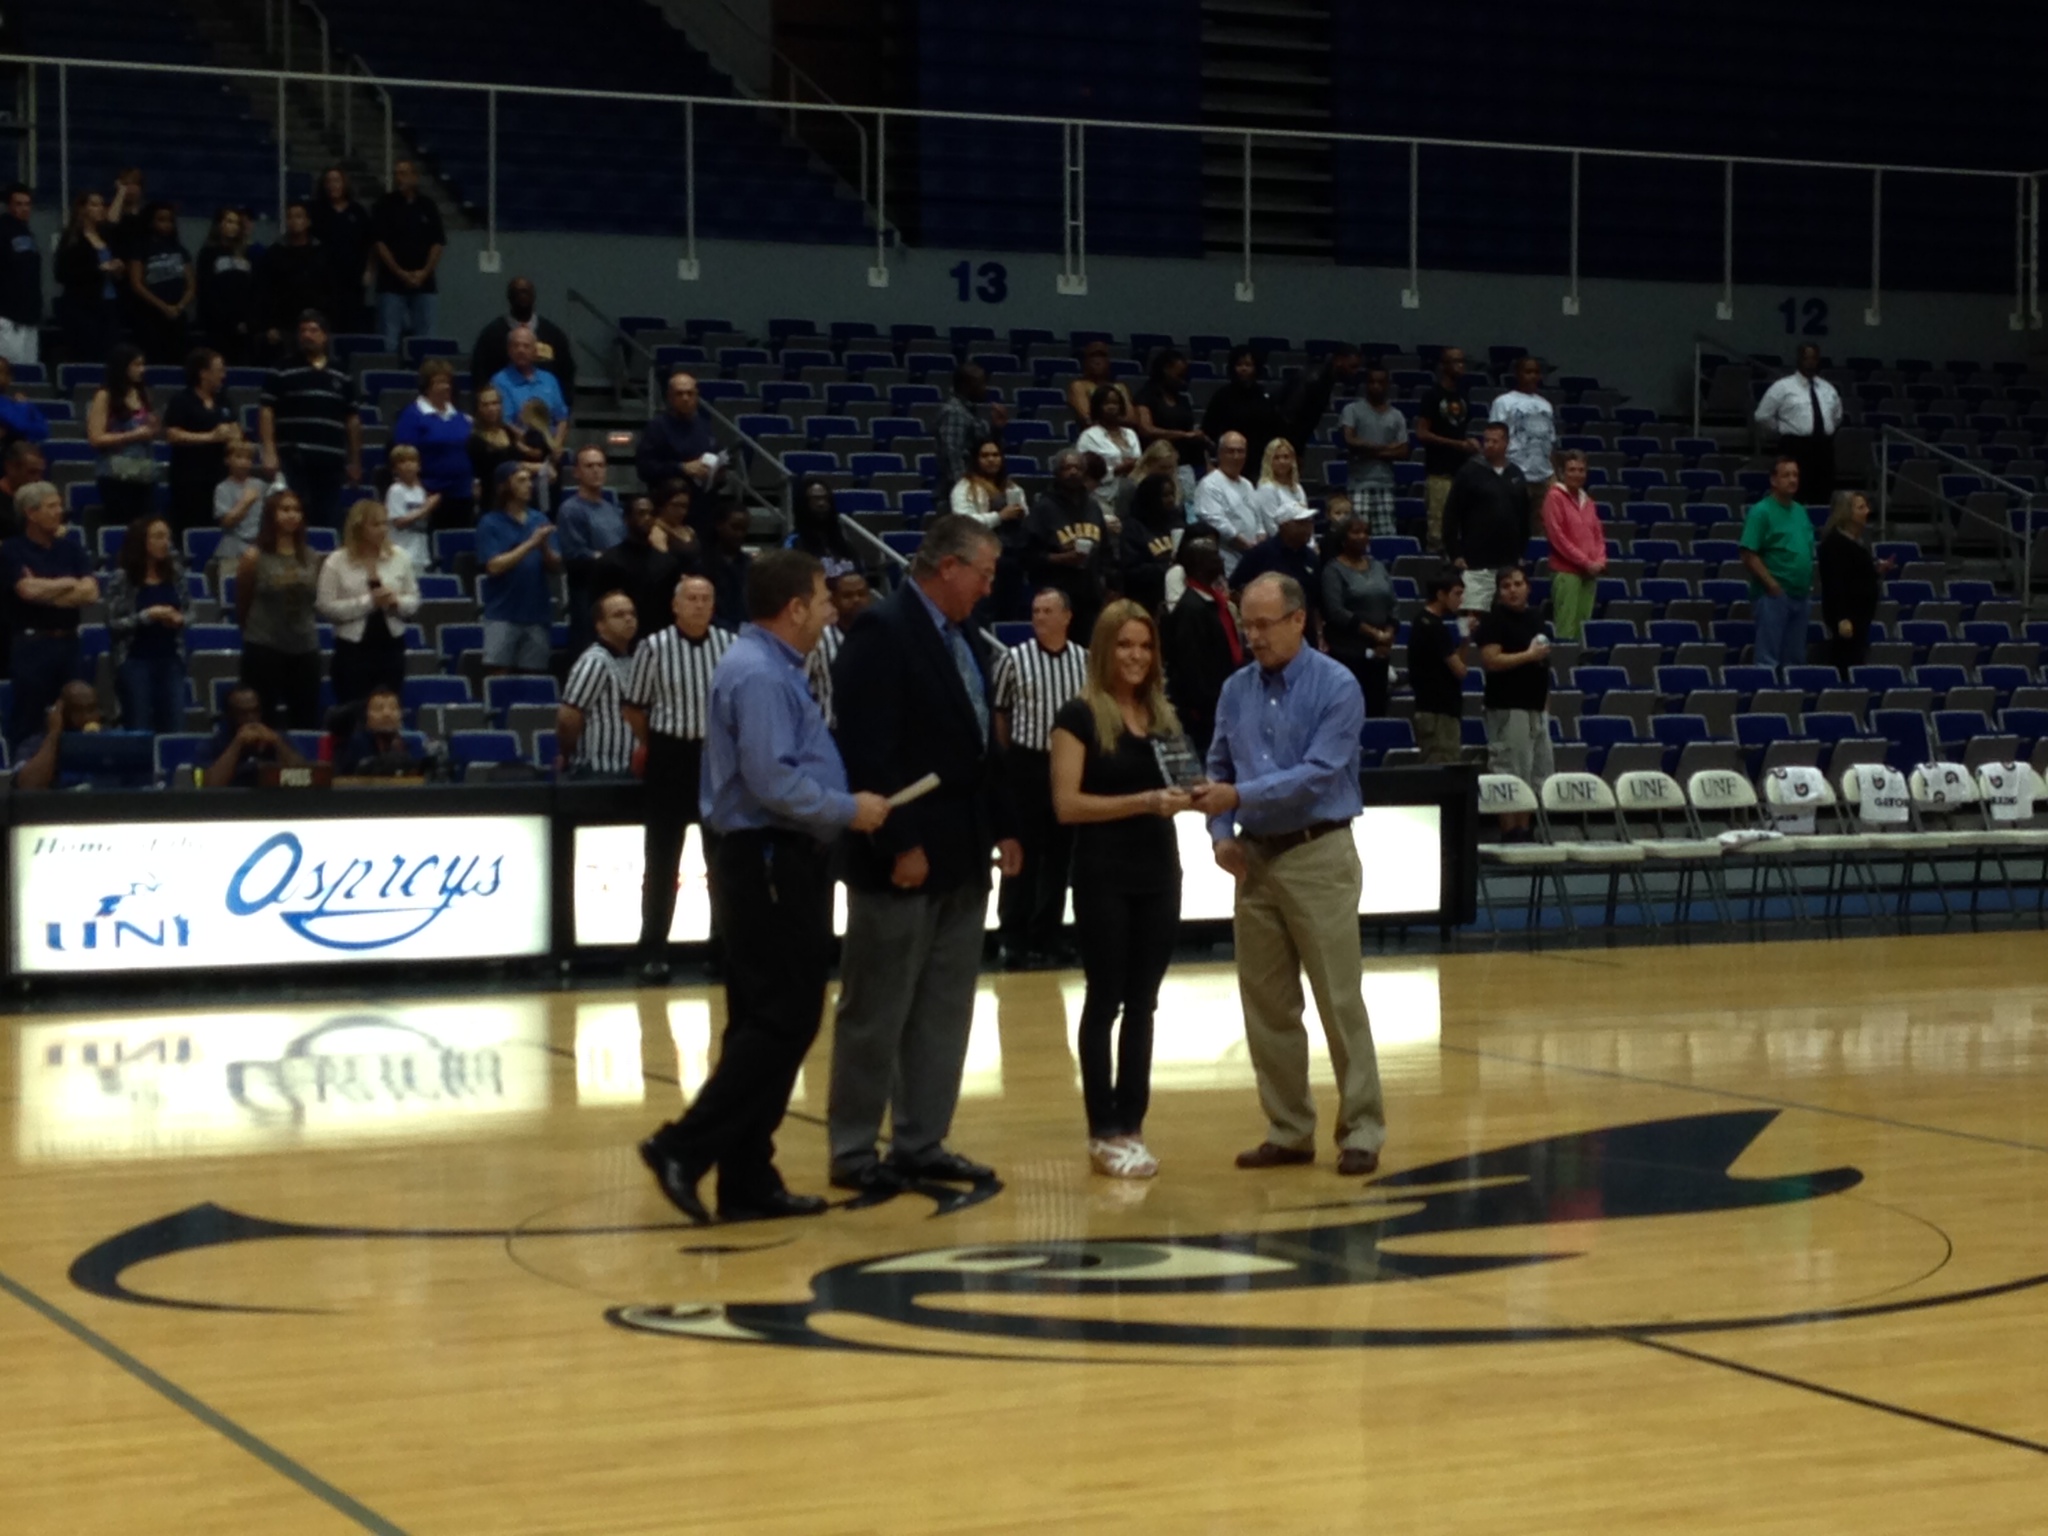 A group of people present Jaime with an award at half court in the arena